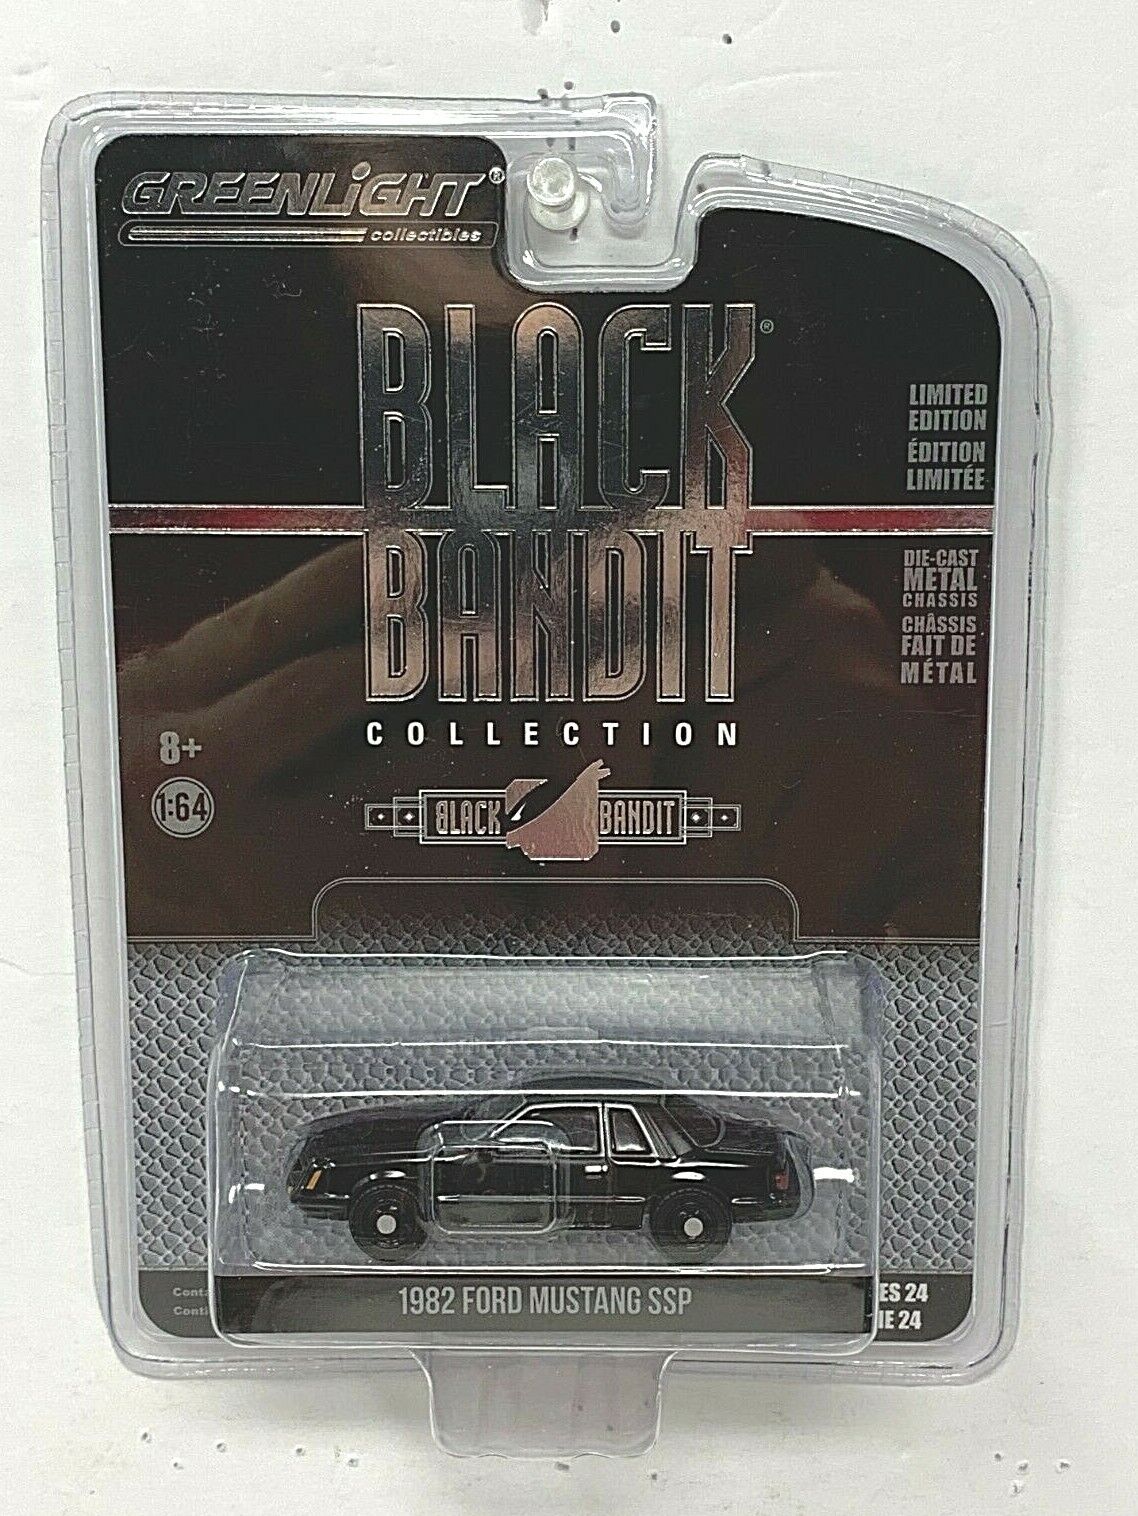 Greenlight 1982 Ford Mustang SSP Black Bandit Collection Series 24 1:64 Diecast